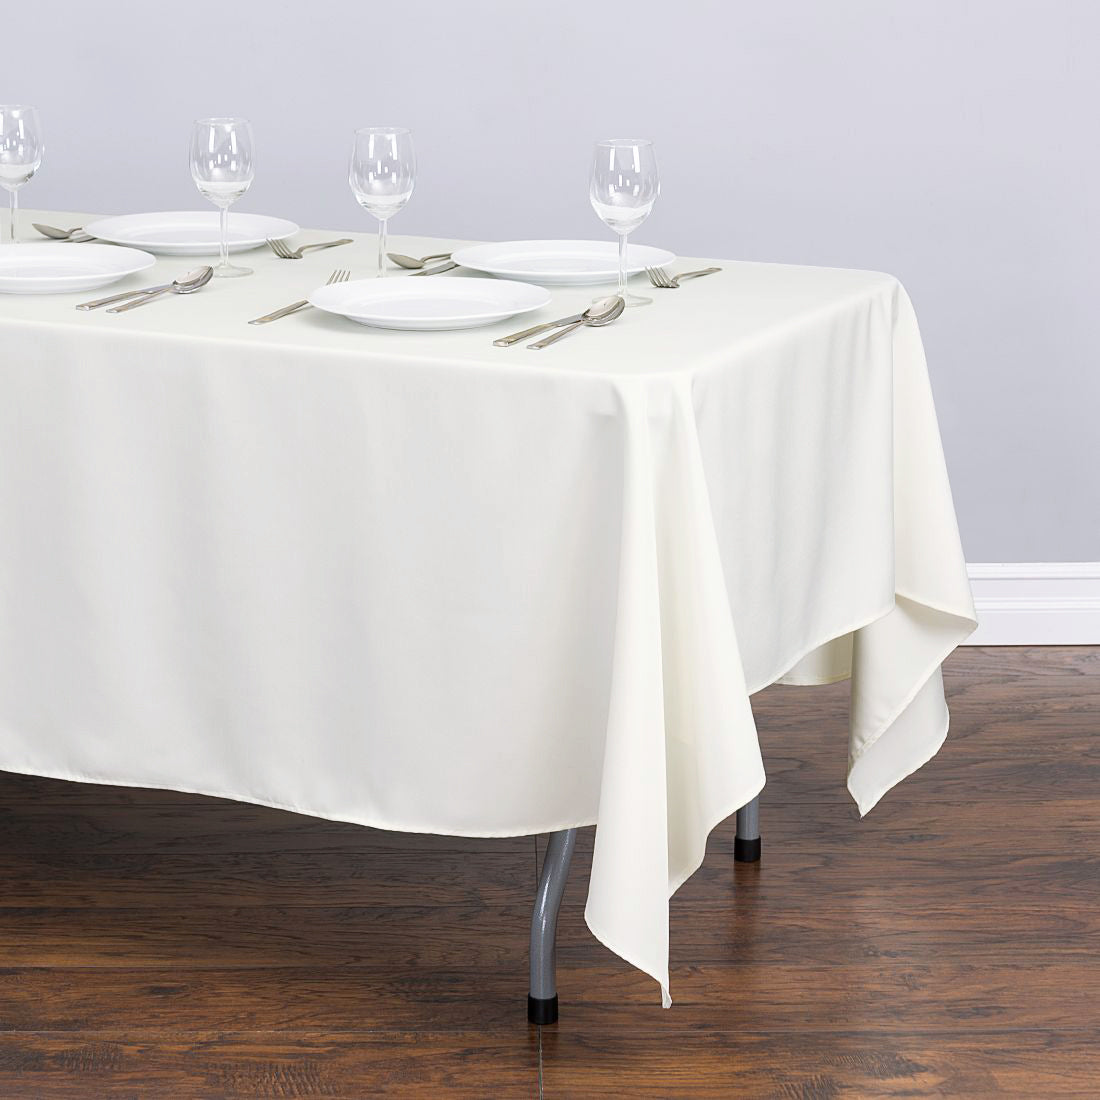 70 by 120 in. Tablecloths